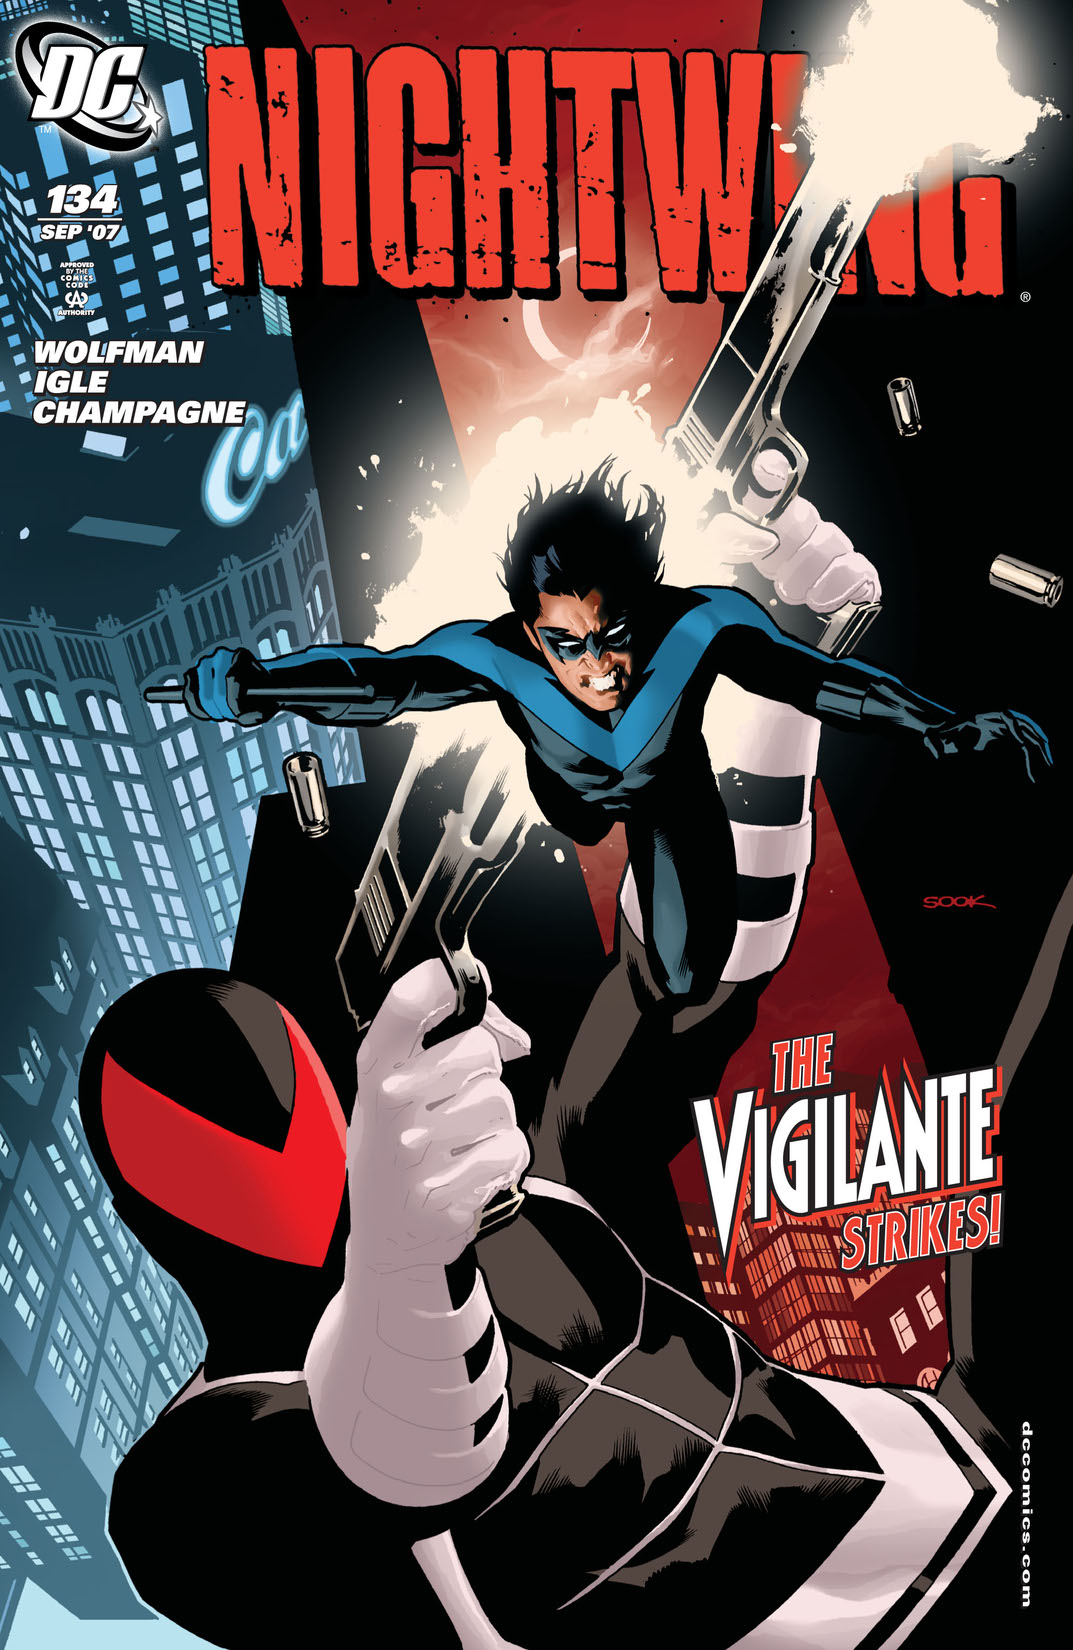 Nightwing (1996-) #134 preview images